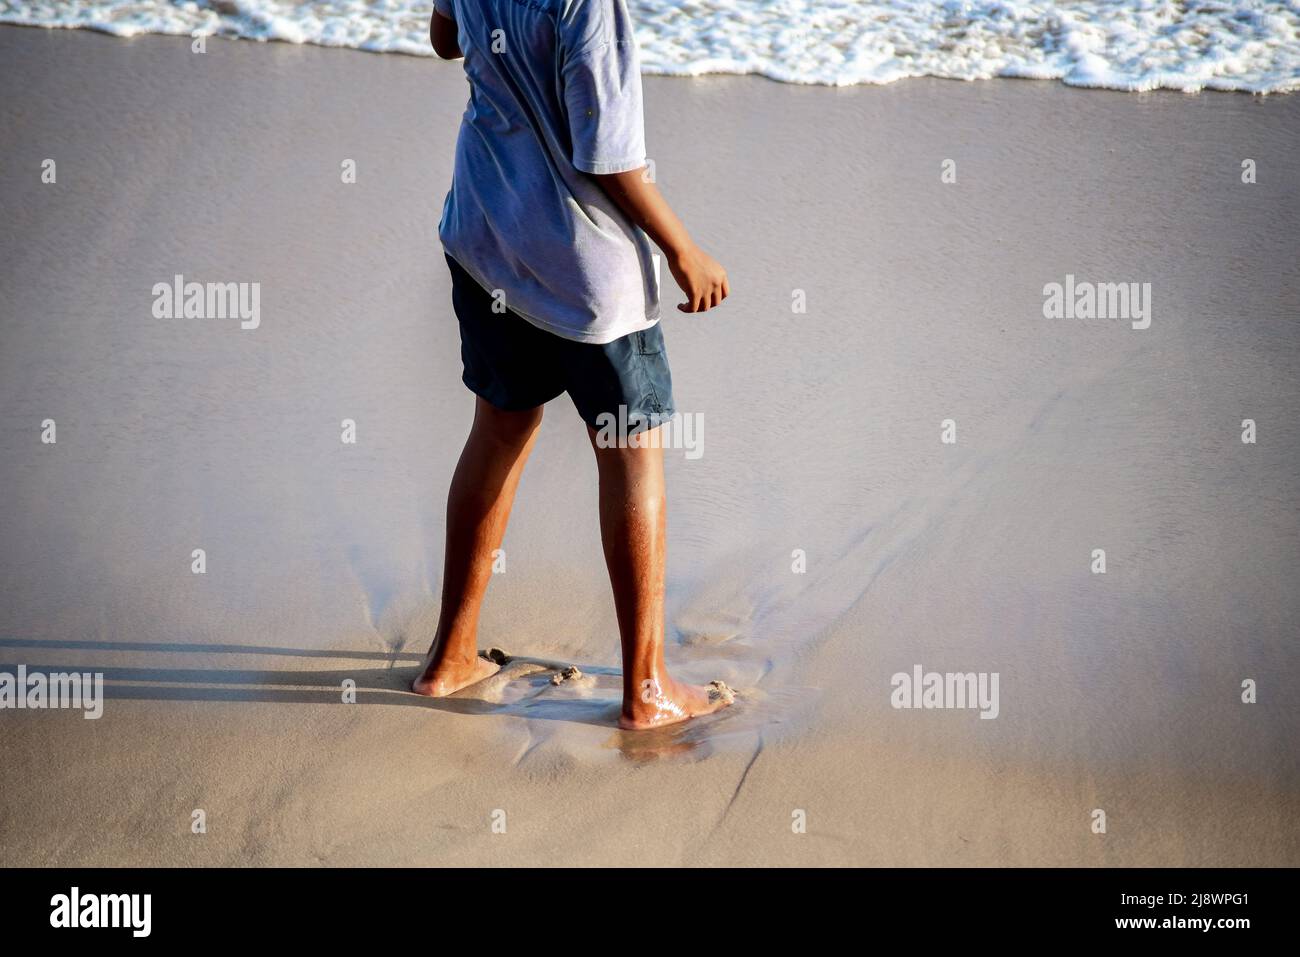 Lower part of a person standing on the beach sand. Salvador city, Bahia state, Brazil. Stock Photo